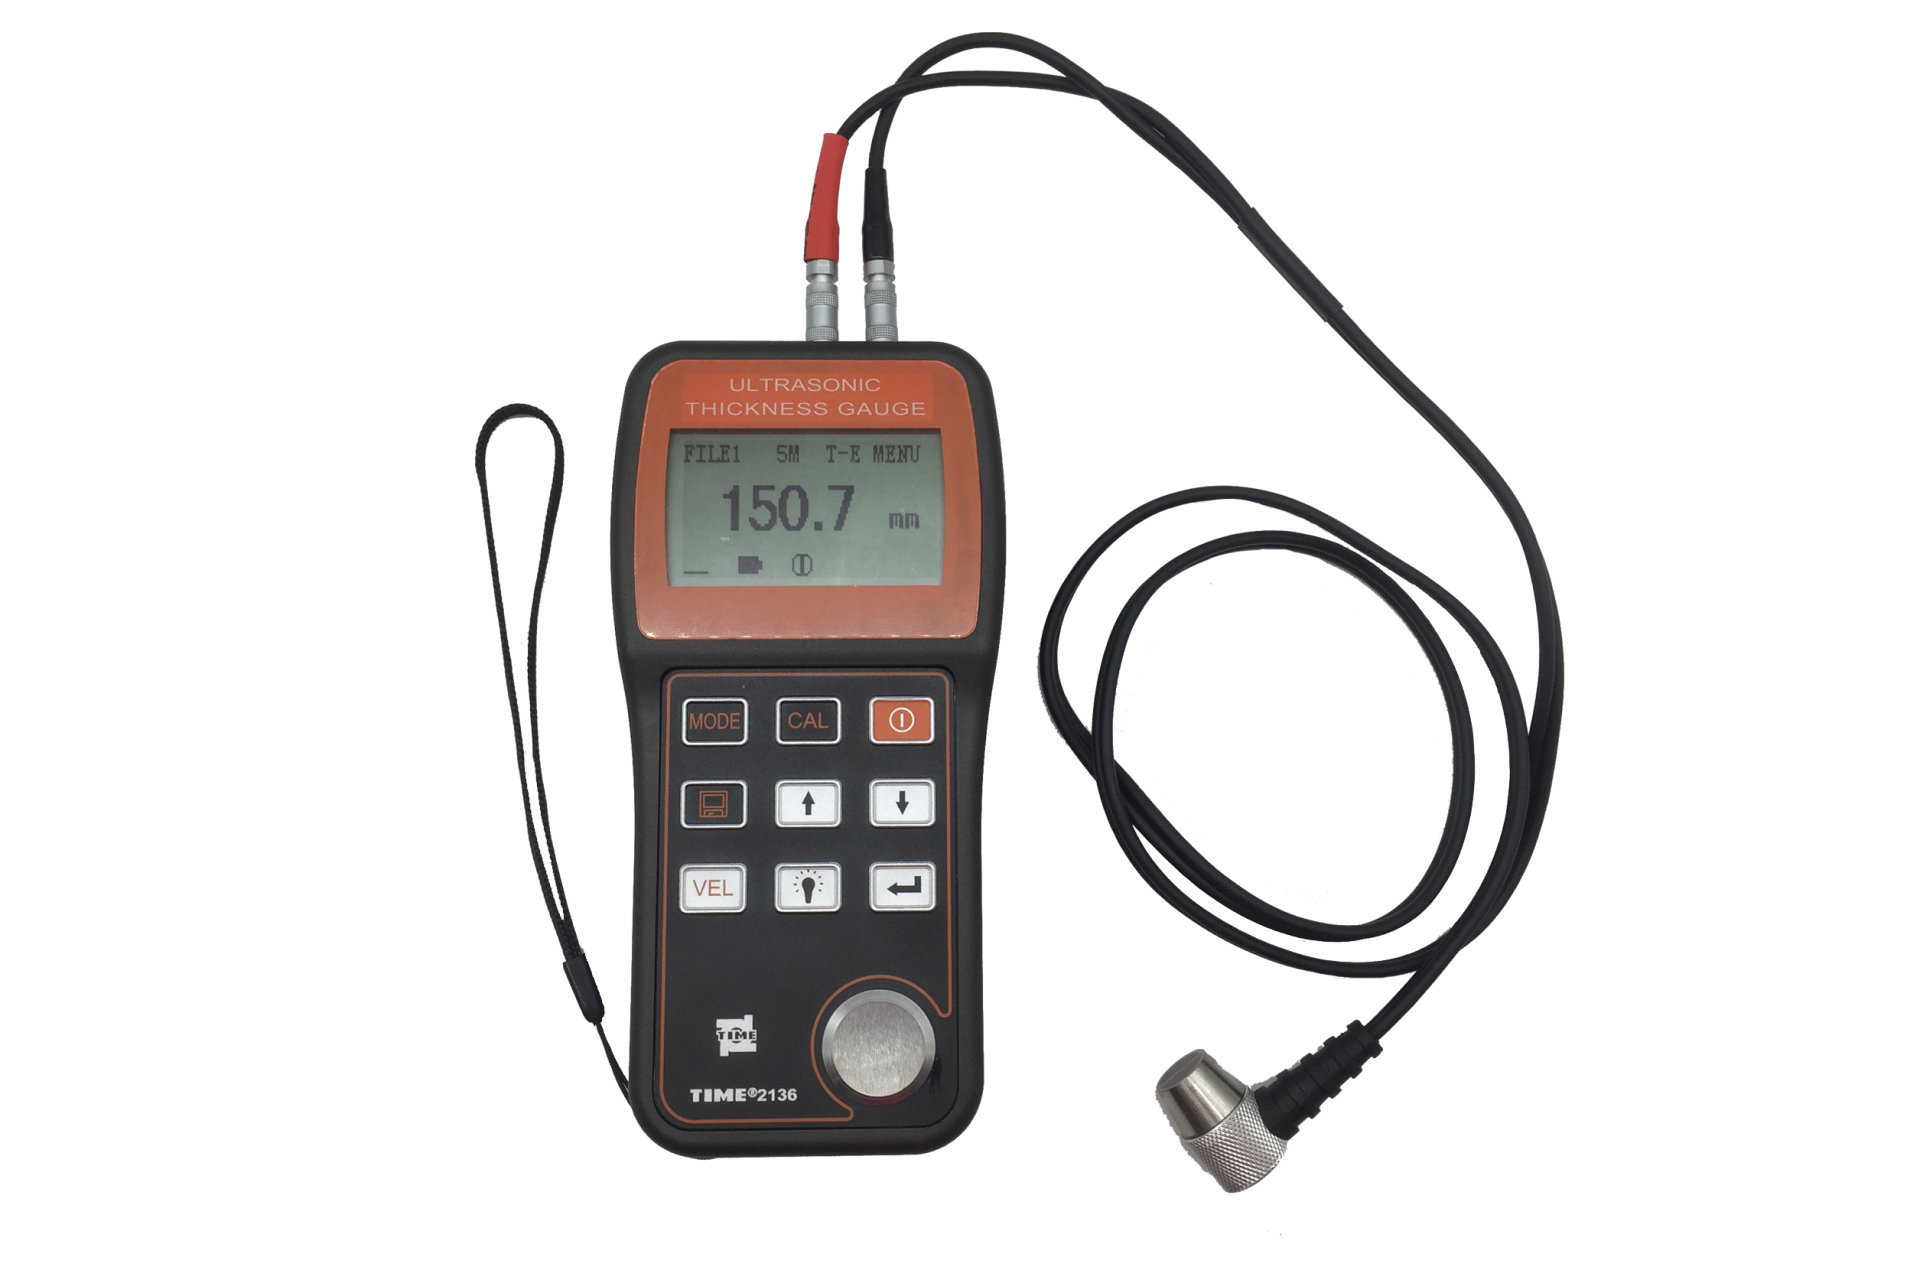 Ultrasonic Thickness Gauge TIME®2136